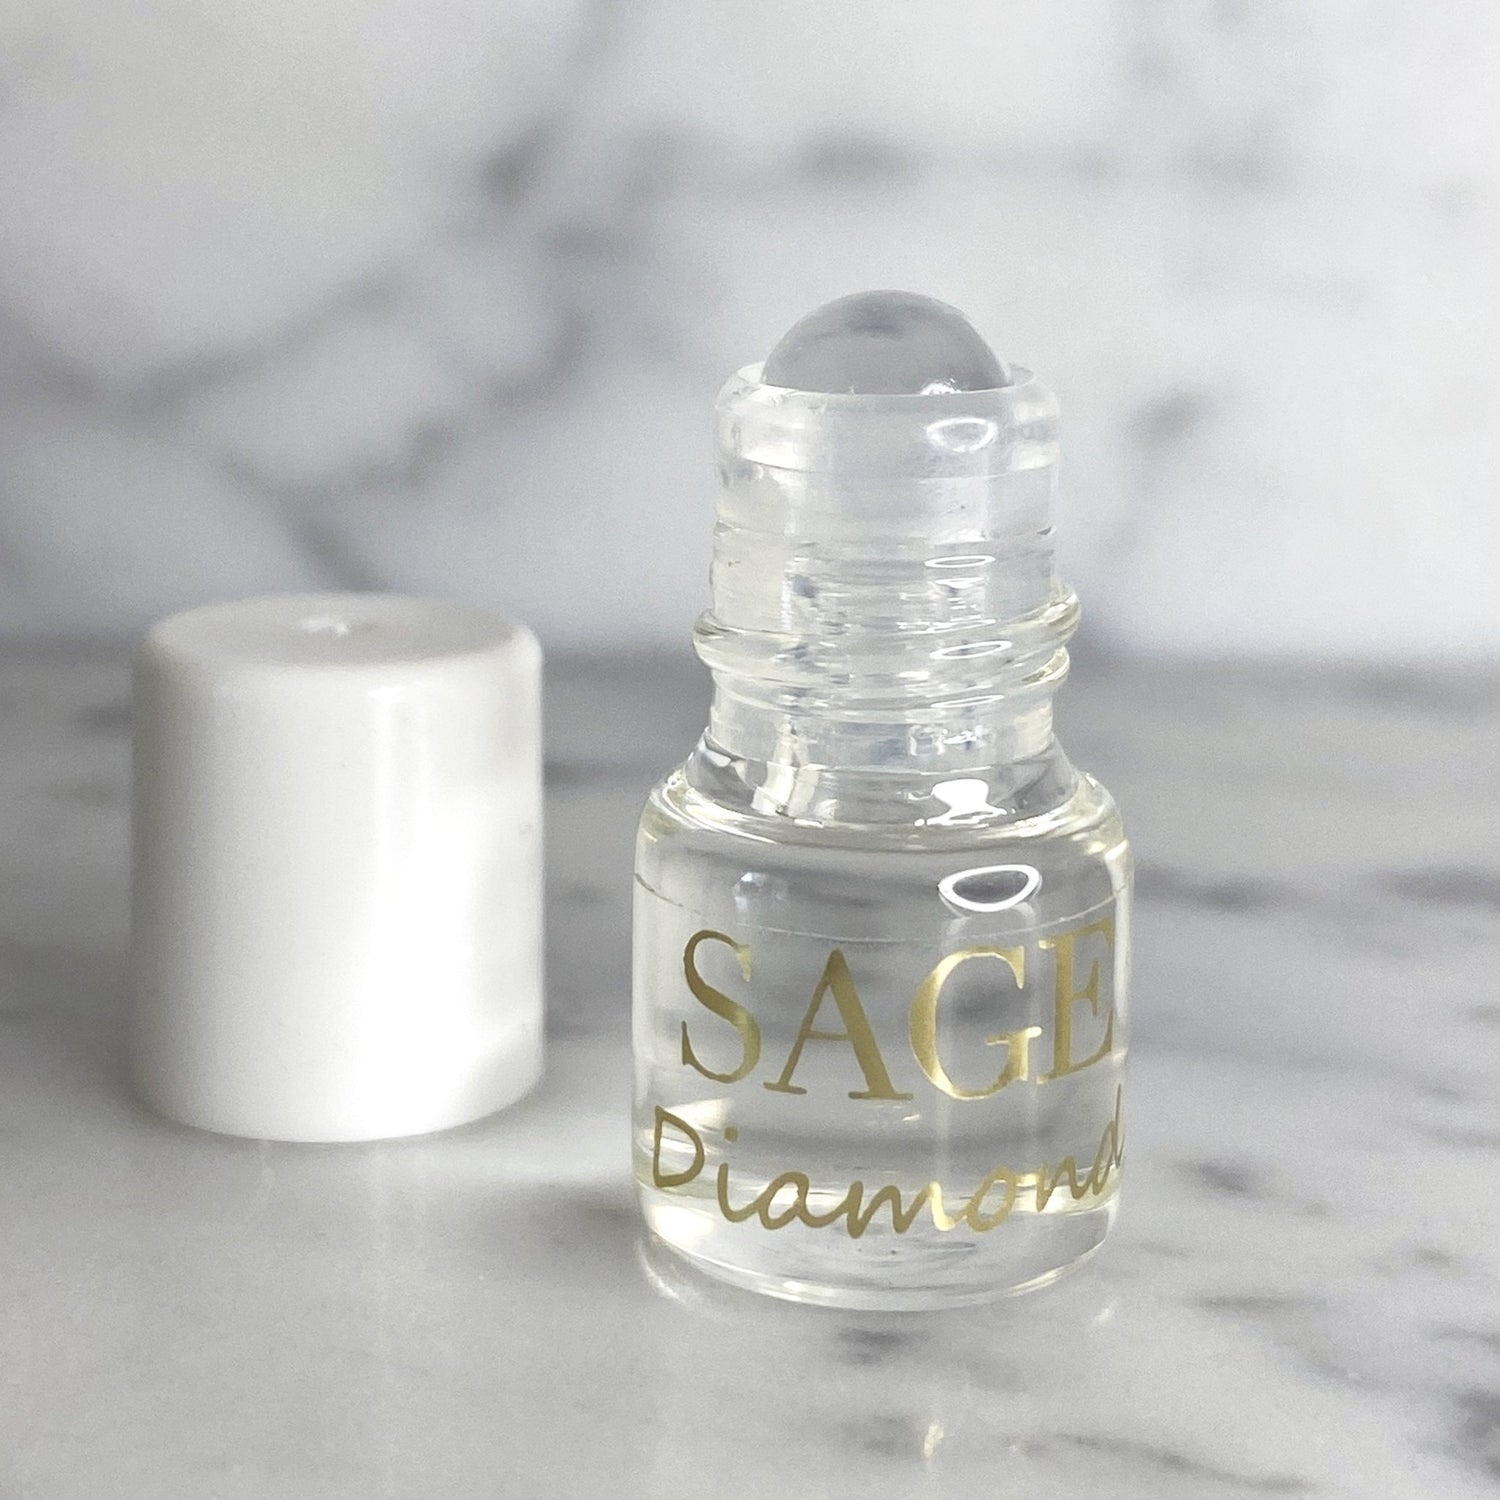 Diamond Perfume Oil Concentrate Sample by Sage